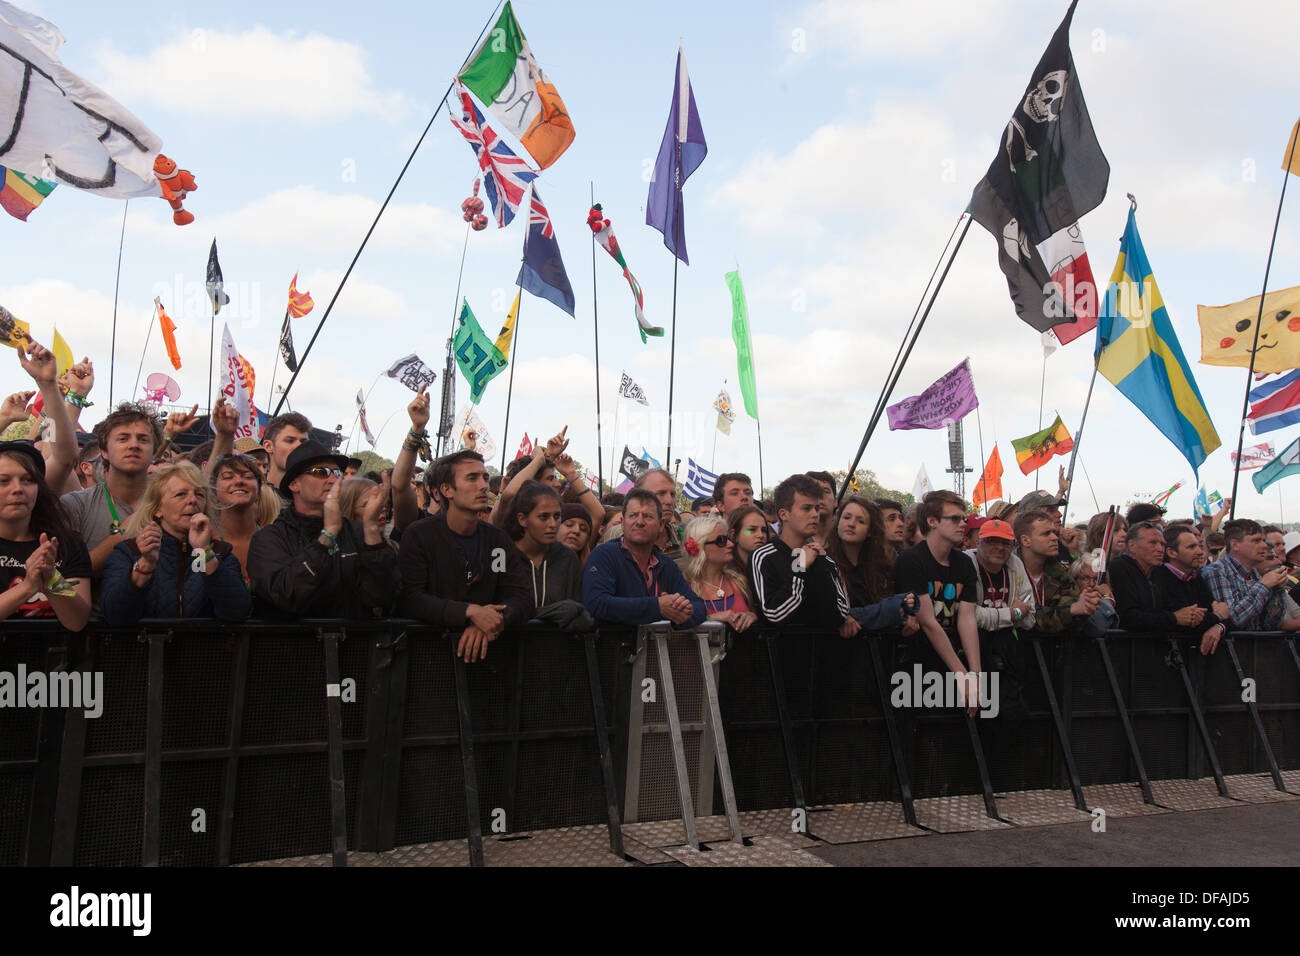 The crowd watching Primal Scream playing the Pyramid stage at the Glastonbury Festival 2013. Stock Photo